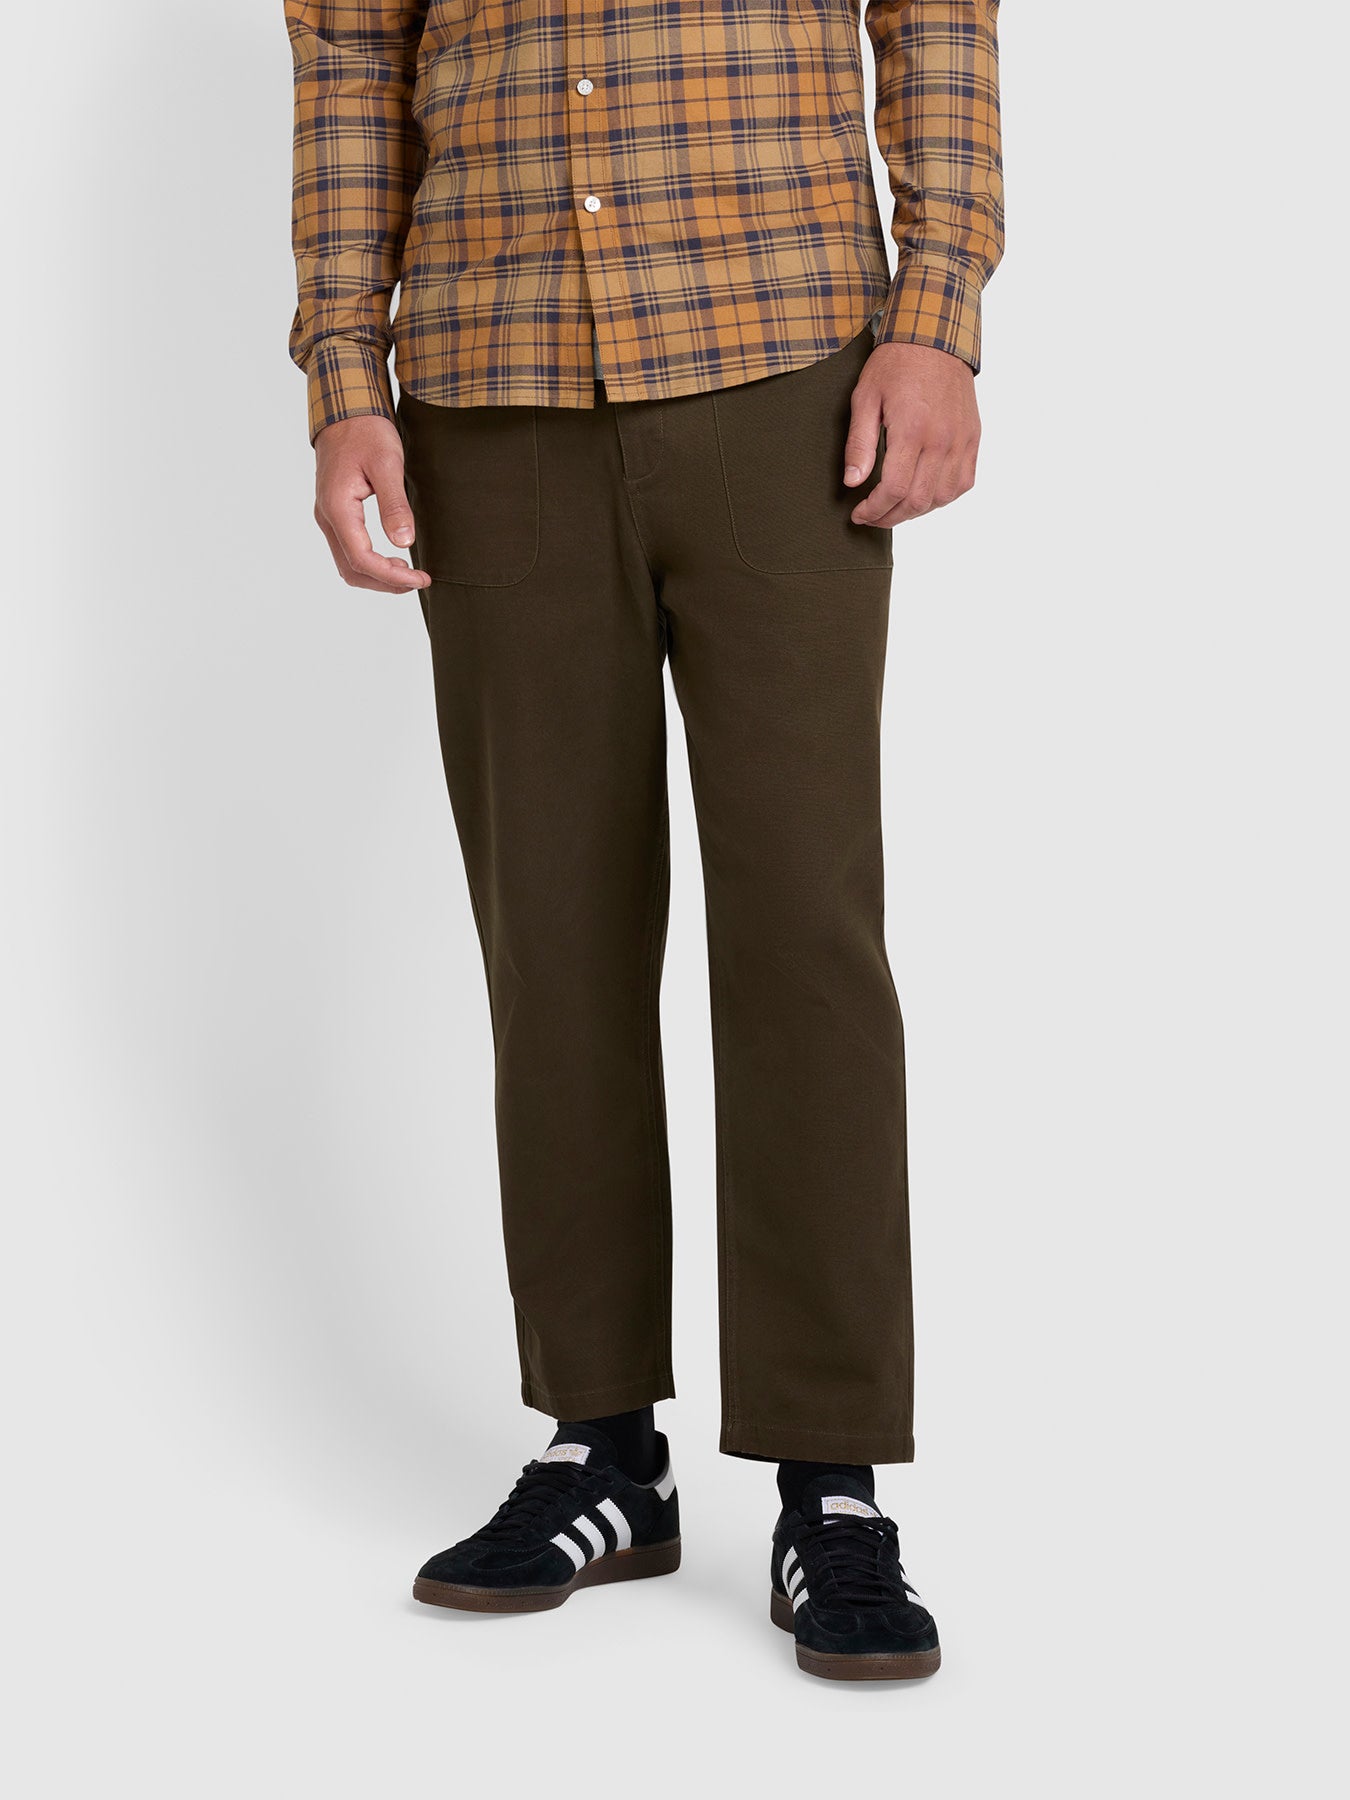 View Hawtin Relaxed Tapered Fit Canvas Trousers In Olive Green information